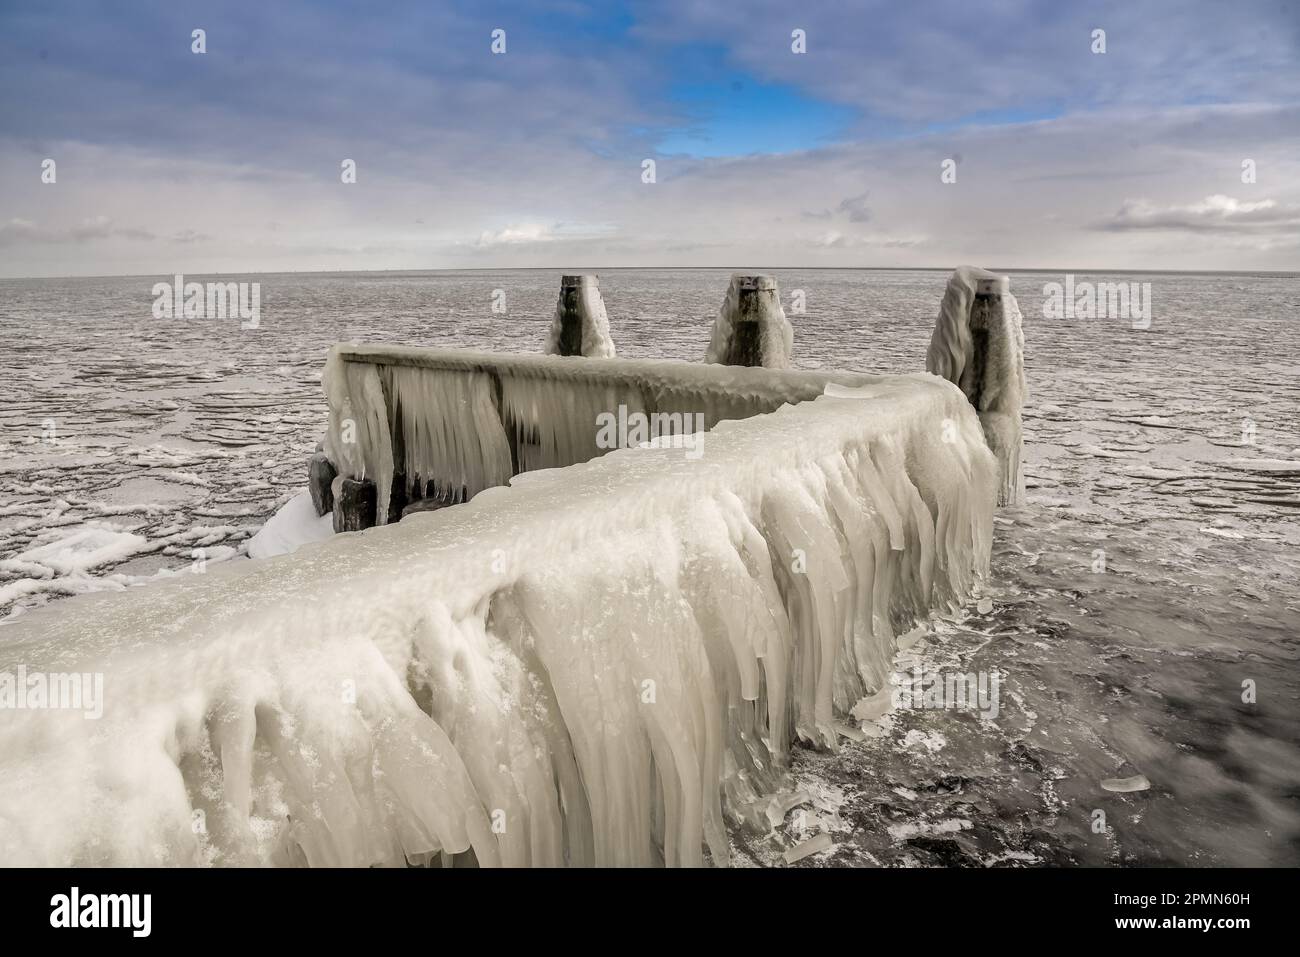 Den Oever, the Netherlands - February 10, 2021. Ice build-up on the piers of the Afsluitdijk in the IJsselmeer, Den Oever, Holland. Stock Photo